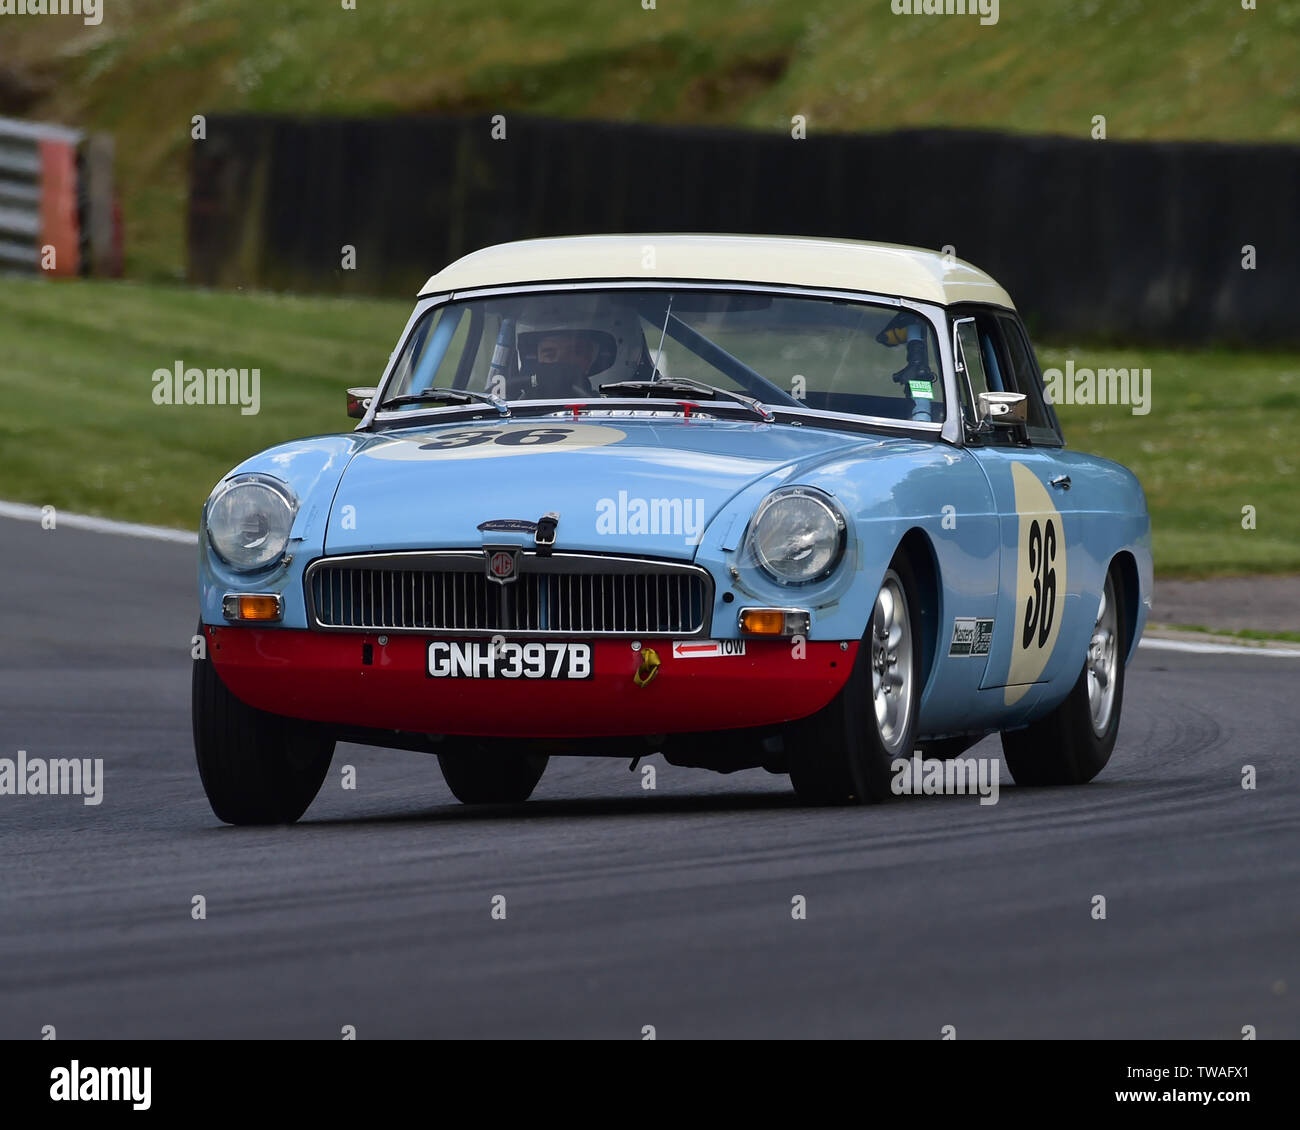 Edward Stone, David Huxley, MGB, Gentlemen Drivers, Pre-66 GT Cars, Masters Historic Festival, Brands Hatch, May 2019. Brands Hatch, classic cars, cla Stock Photo